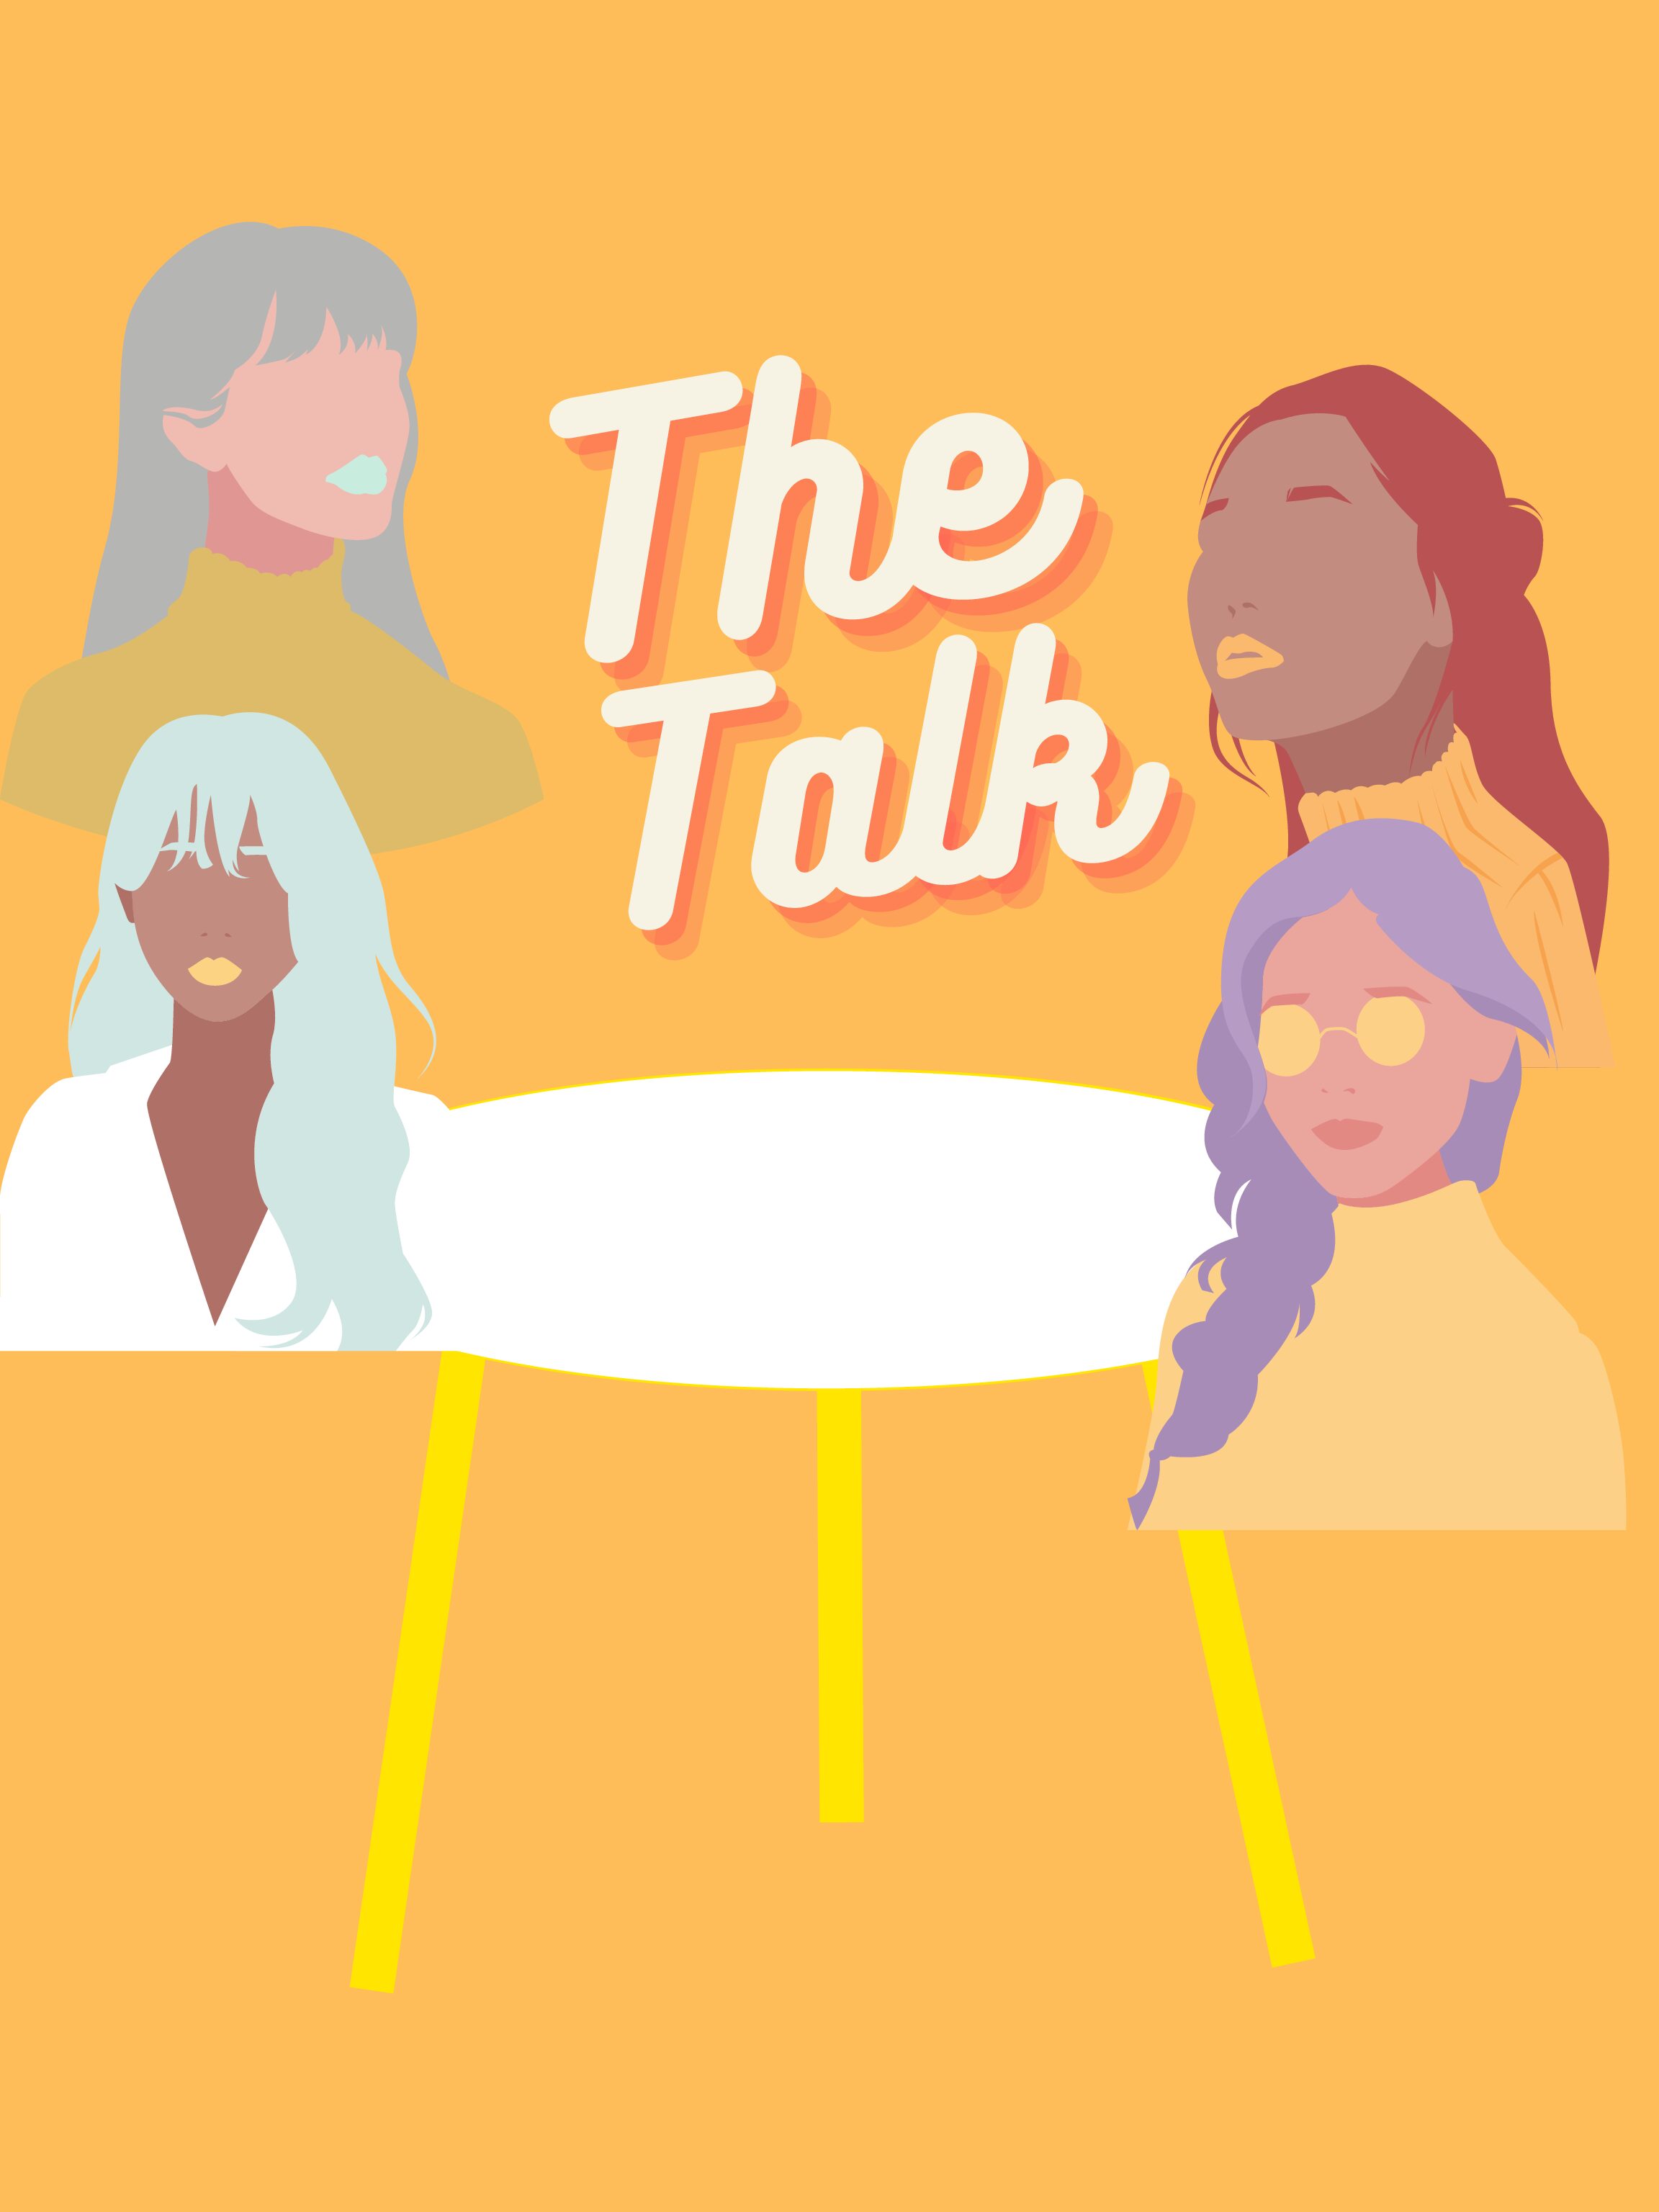 ‘The Talk’s lesson on racism